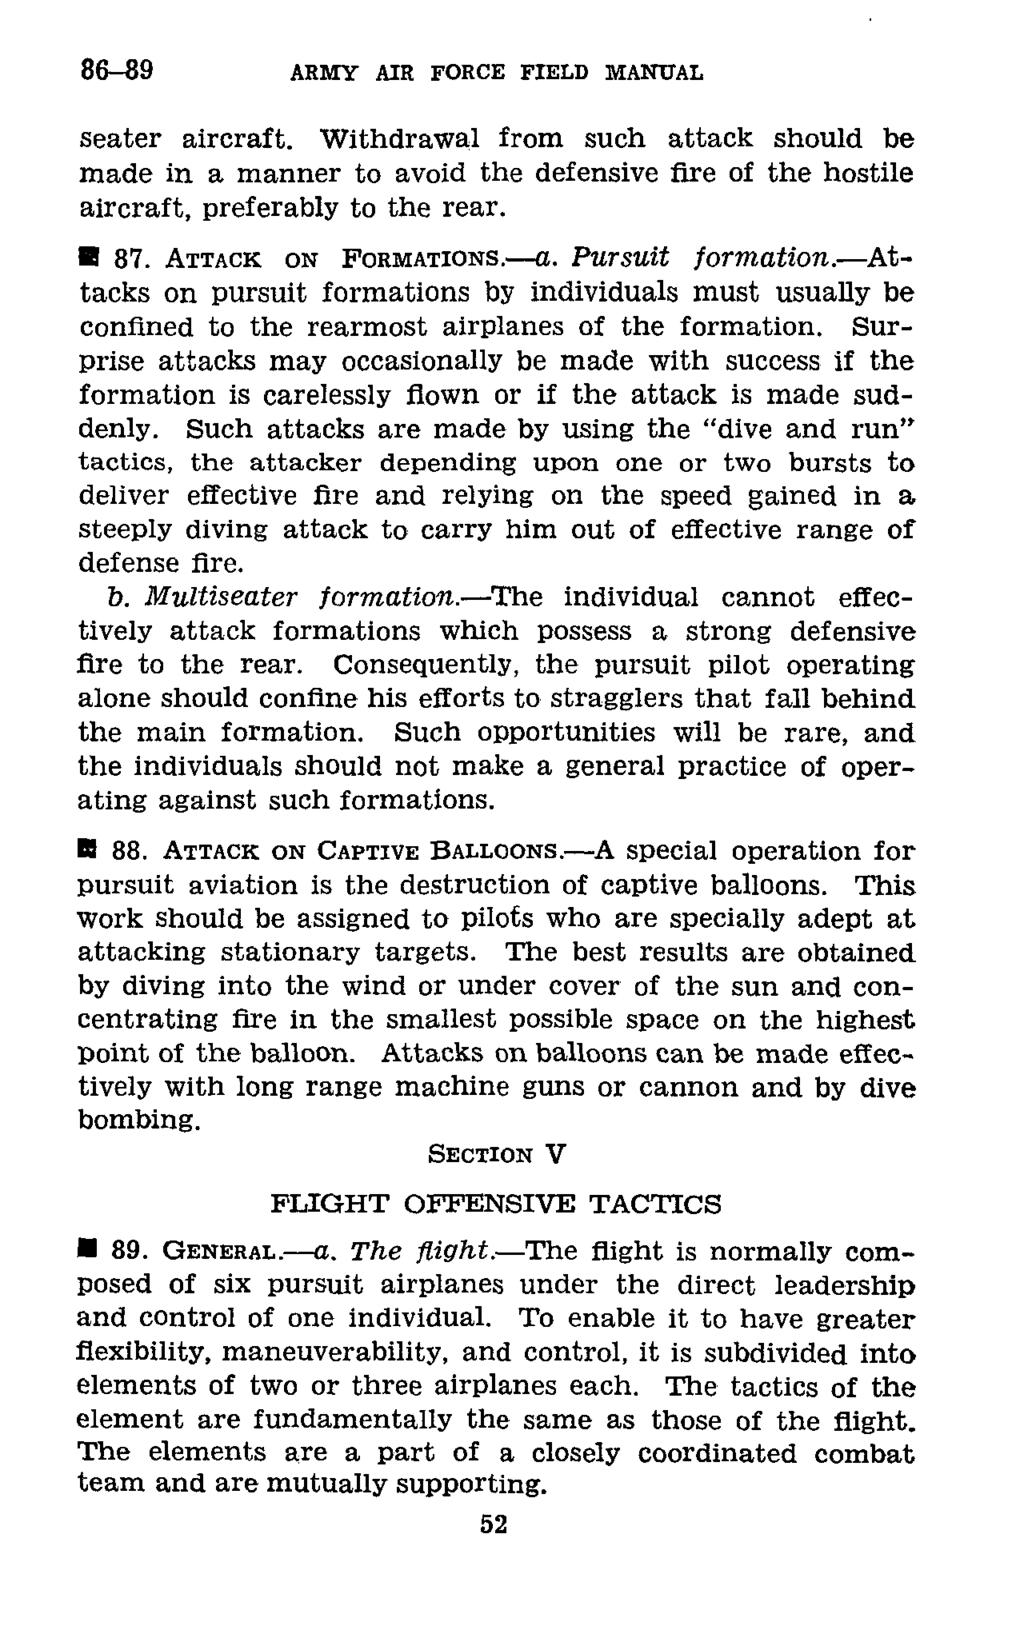 86-89 ARMY AIR FORCE FIELD MANUAL seater aircraft. Withdrawal from such attack should be made in a manner to avoid the defensive fire of the hostile aircraft, preferably to the rear. * 87.